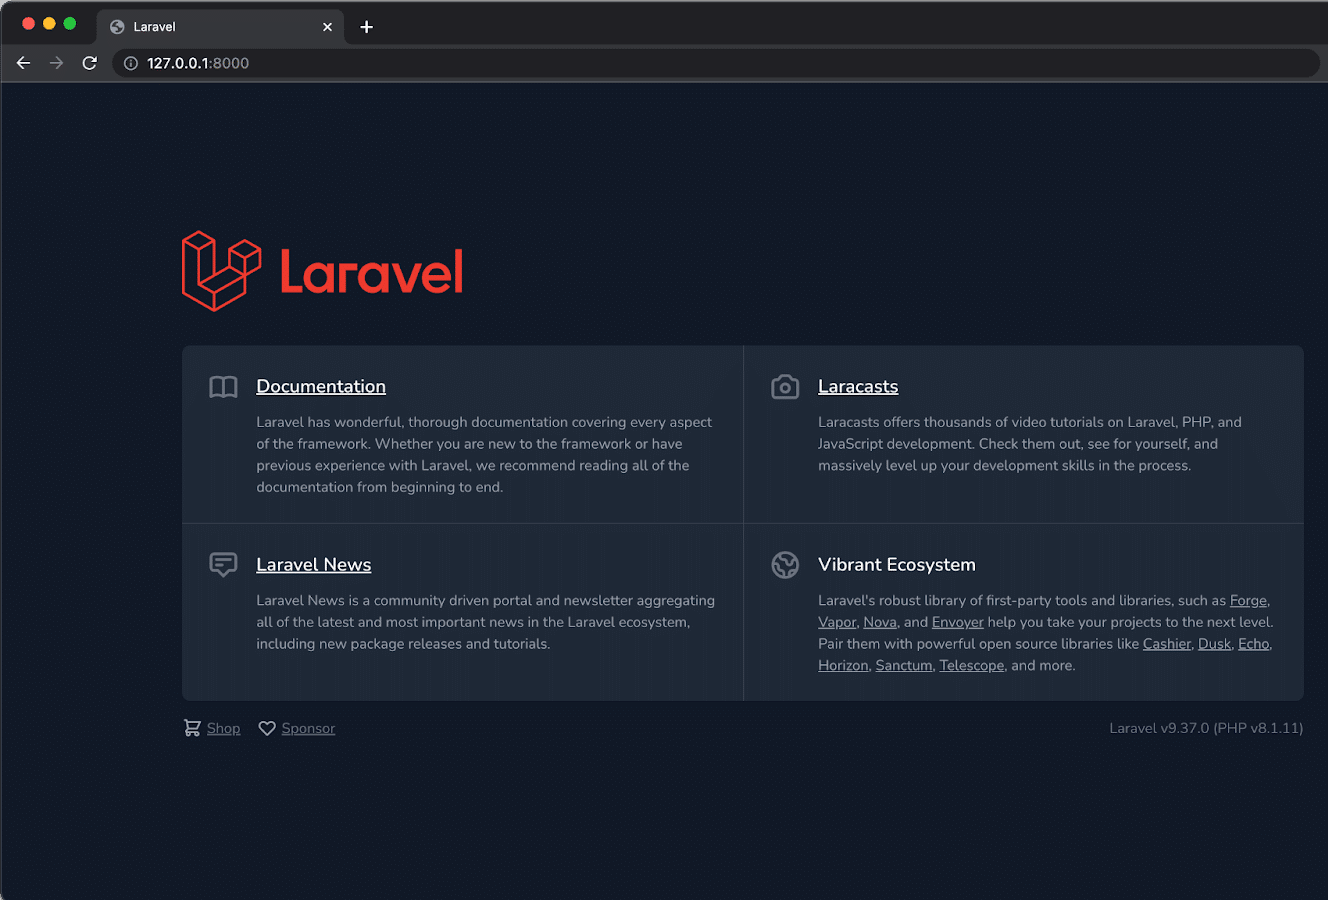 Welcome page of the Laravel application